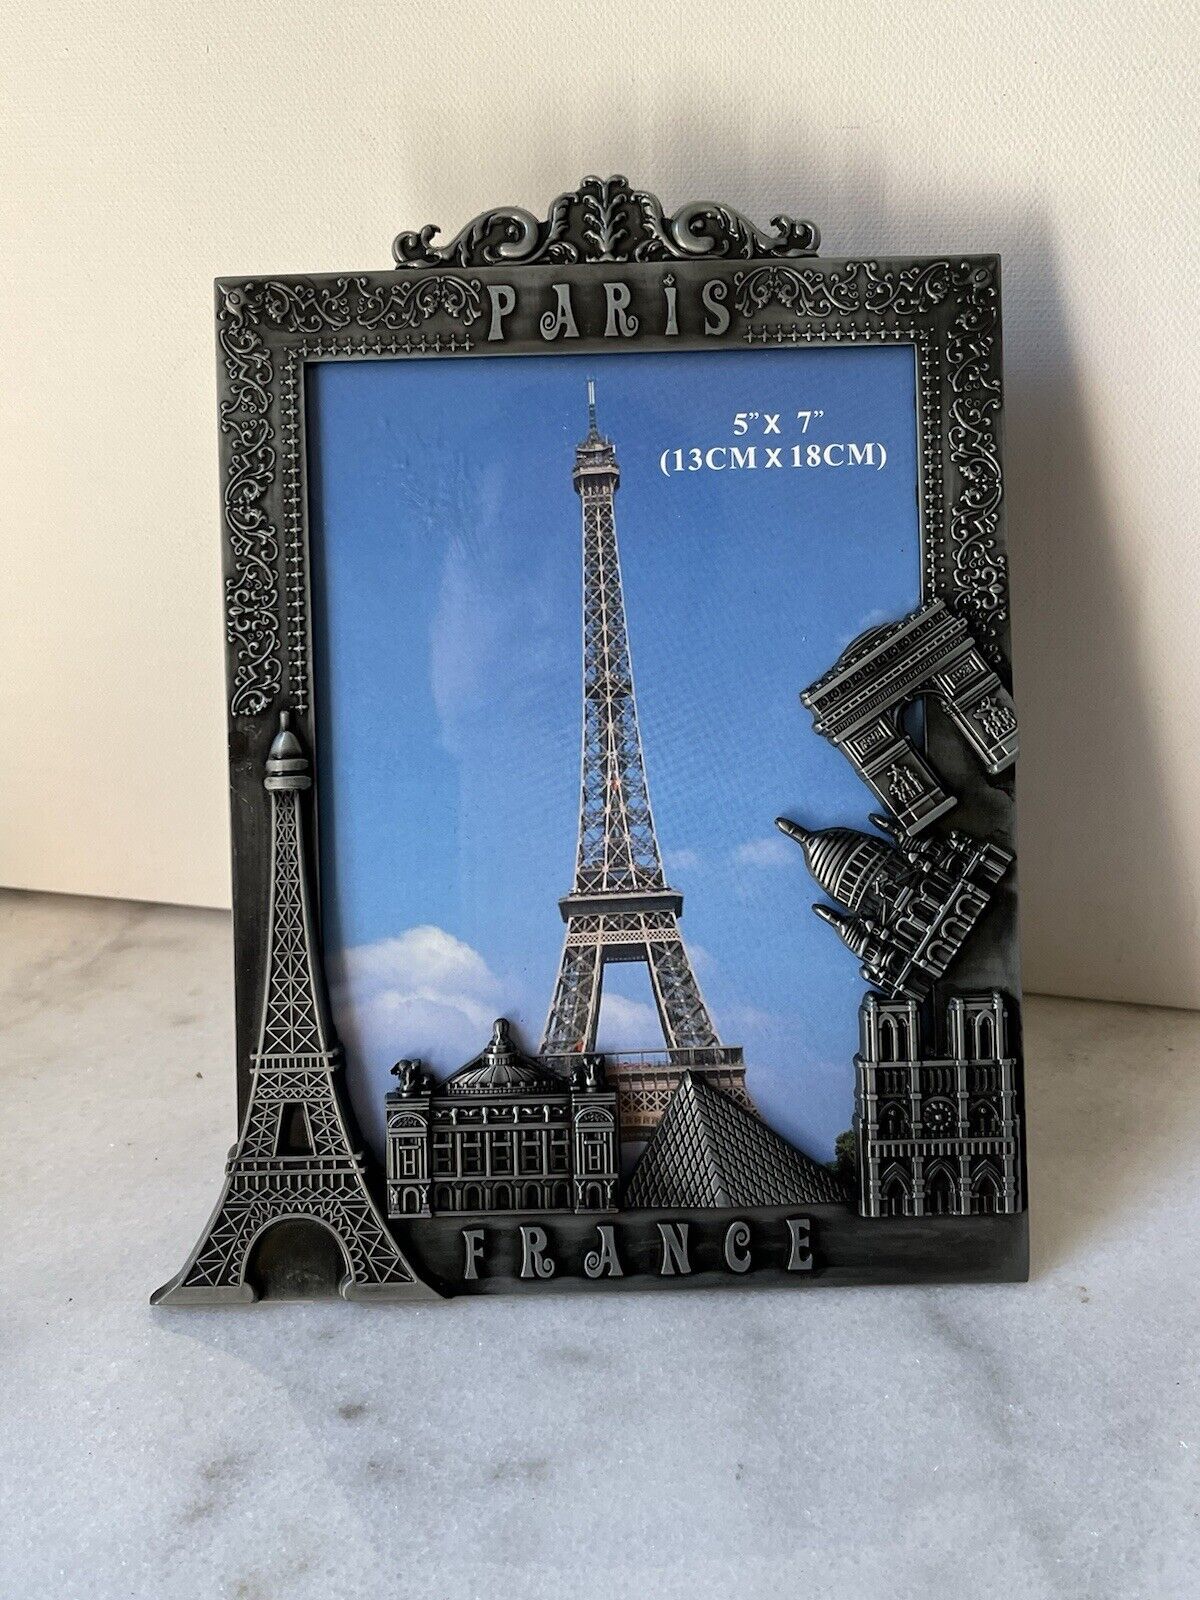 Paris Eiffel Tower France Picture Frame Metal Silver For 5”x7” Photo